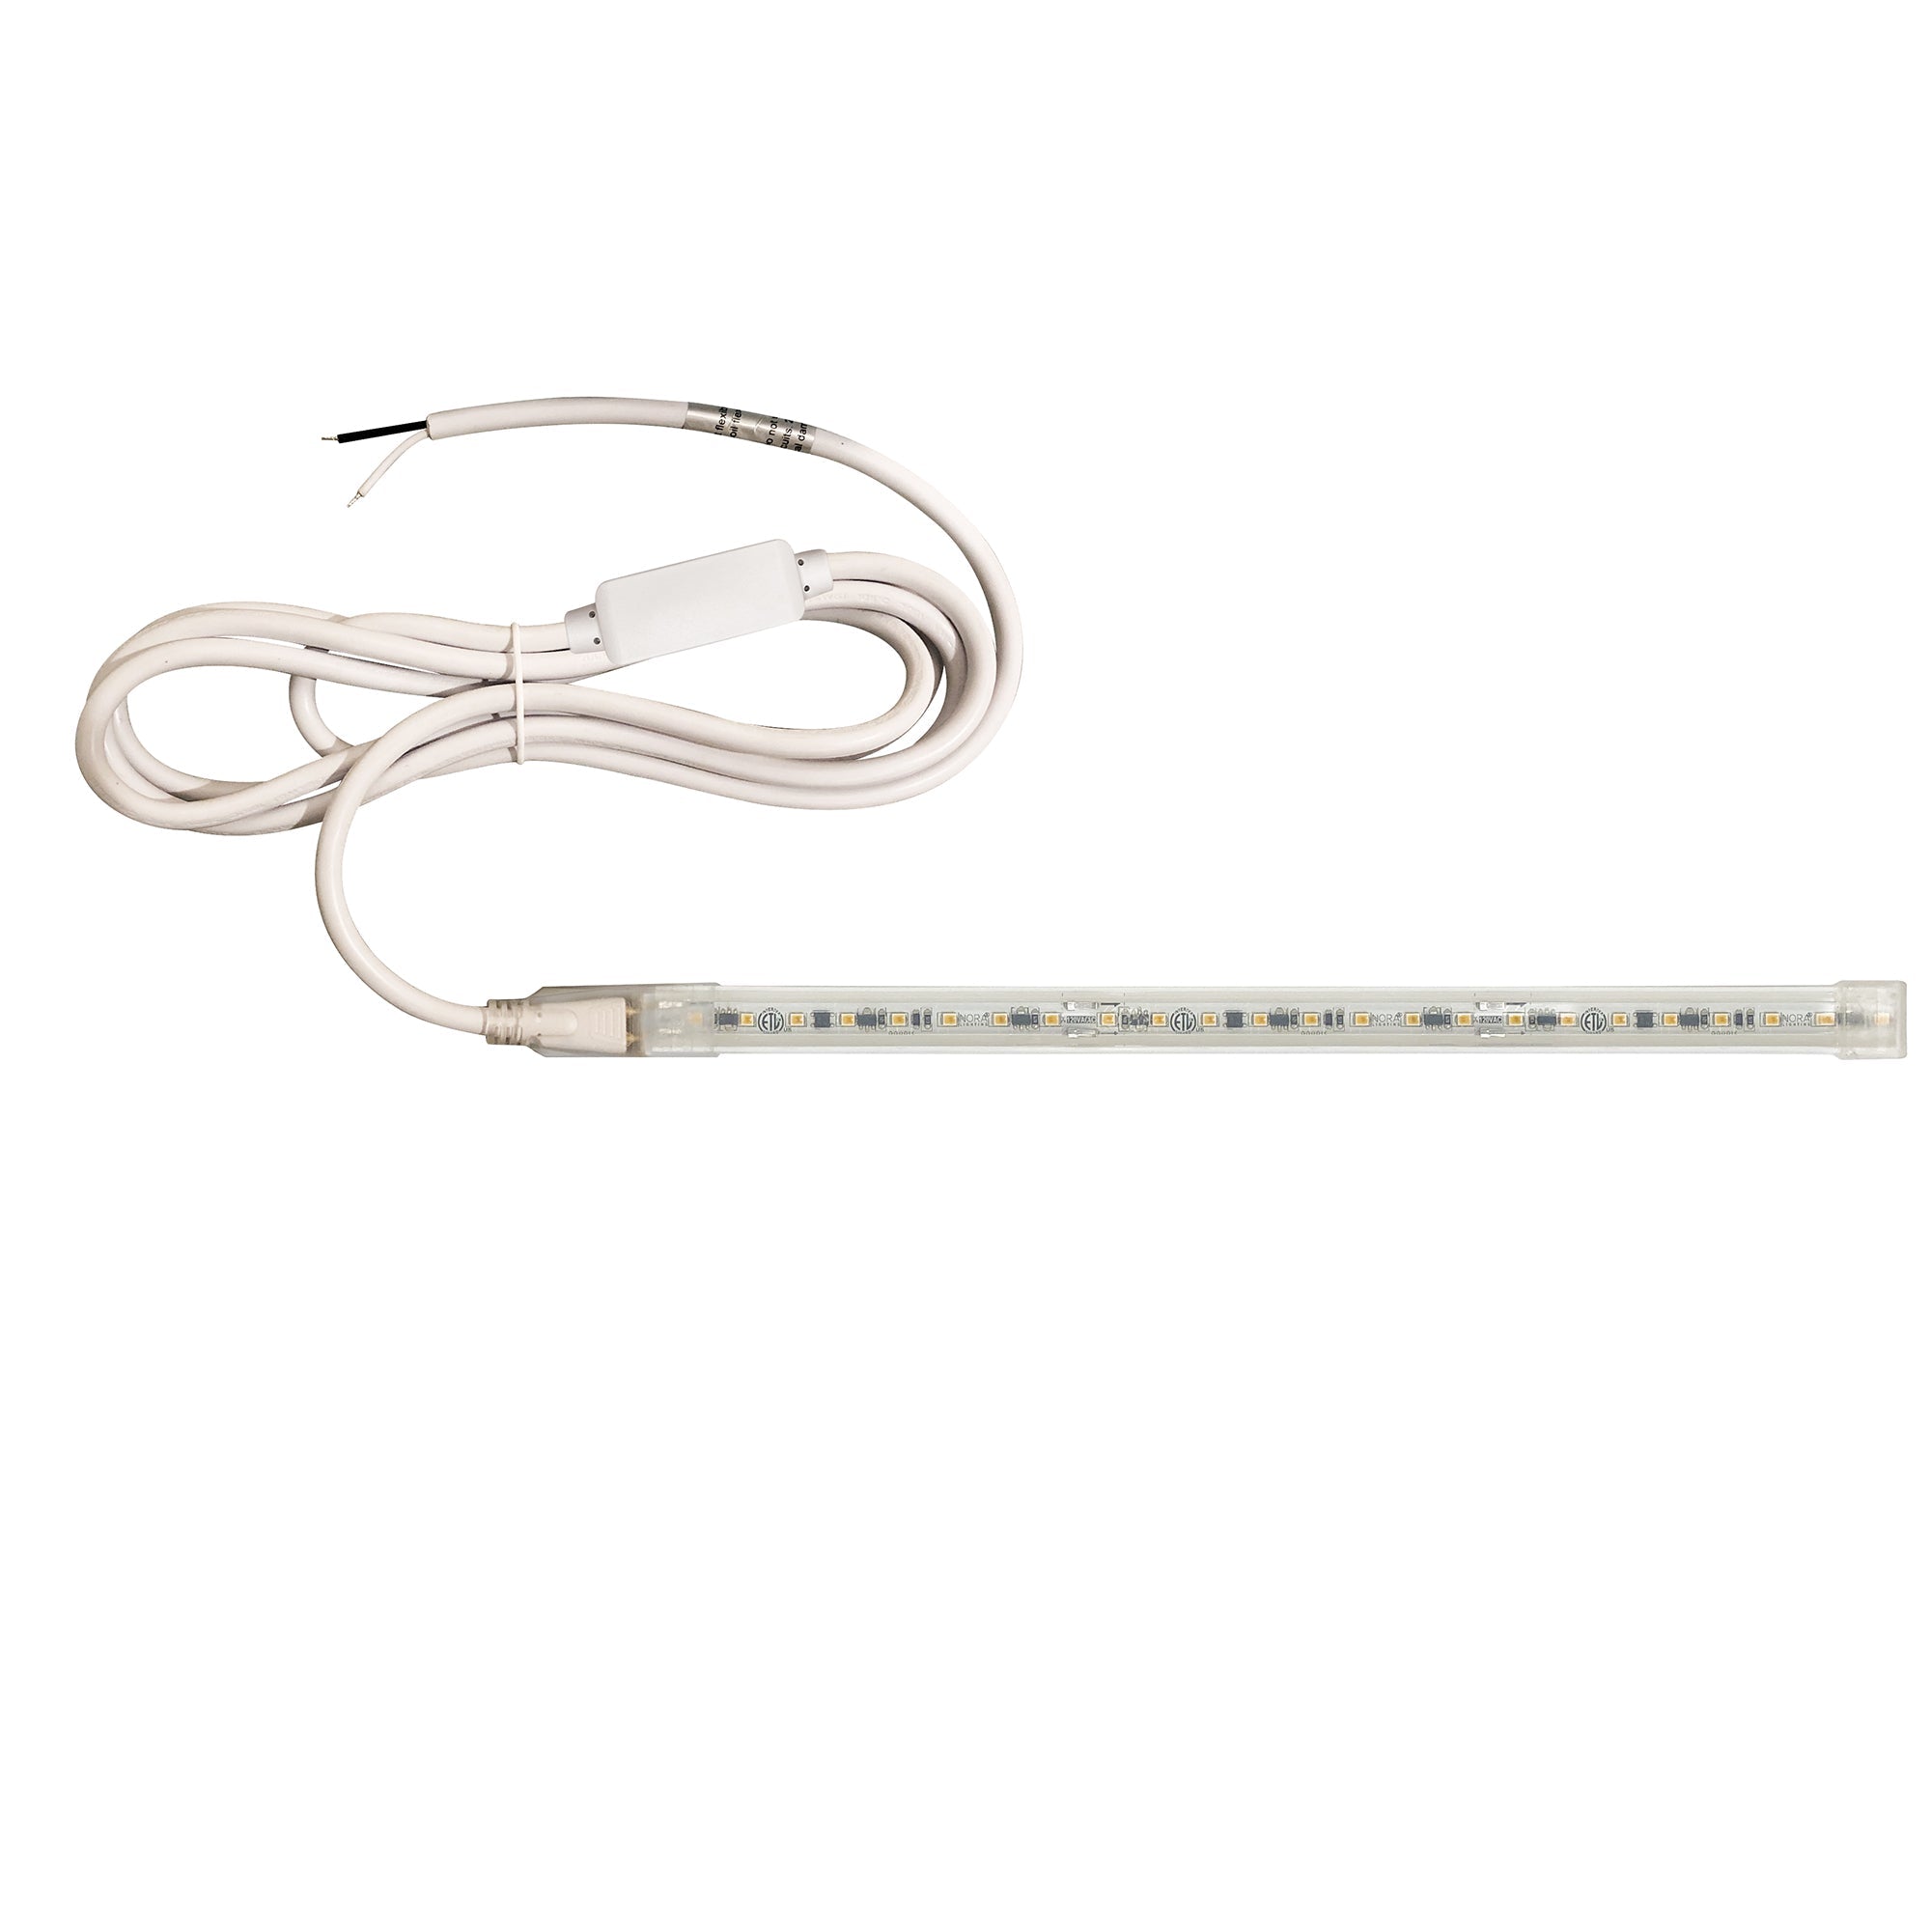 Nora Lighting NUTP13-W60-12-930/HWSP - Accent / Undercabinet - Custom Cut 60-ft 120V Continuous LED Tape Light, 330lm / 3.6W per foot, 3000K, w/ Mounting Clips and 8' Hardwired Power Cord w/ Surge Protector